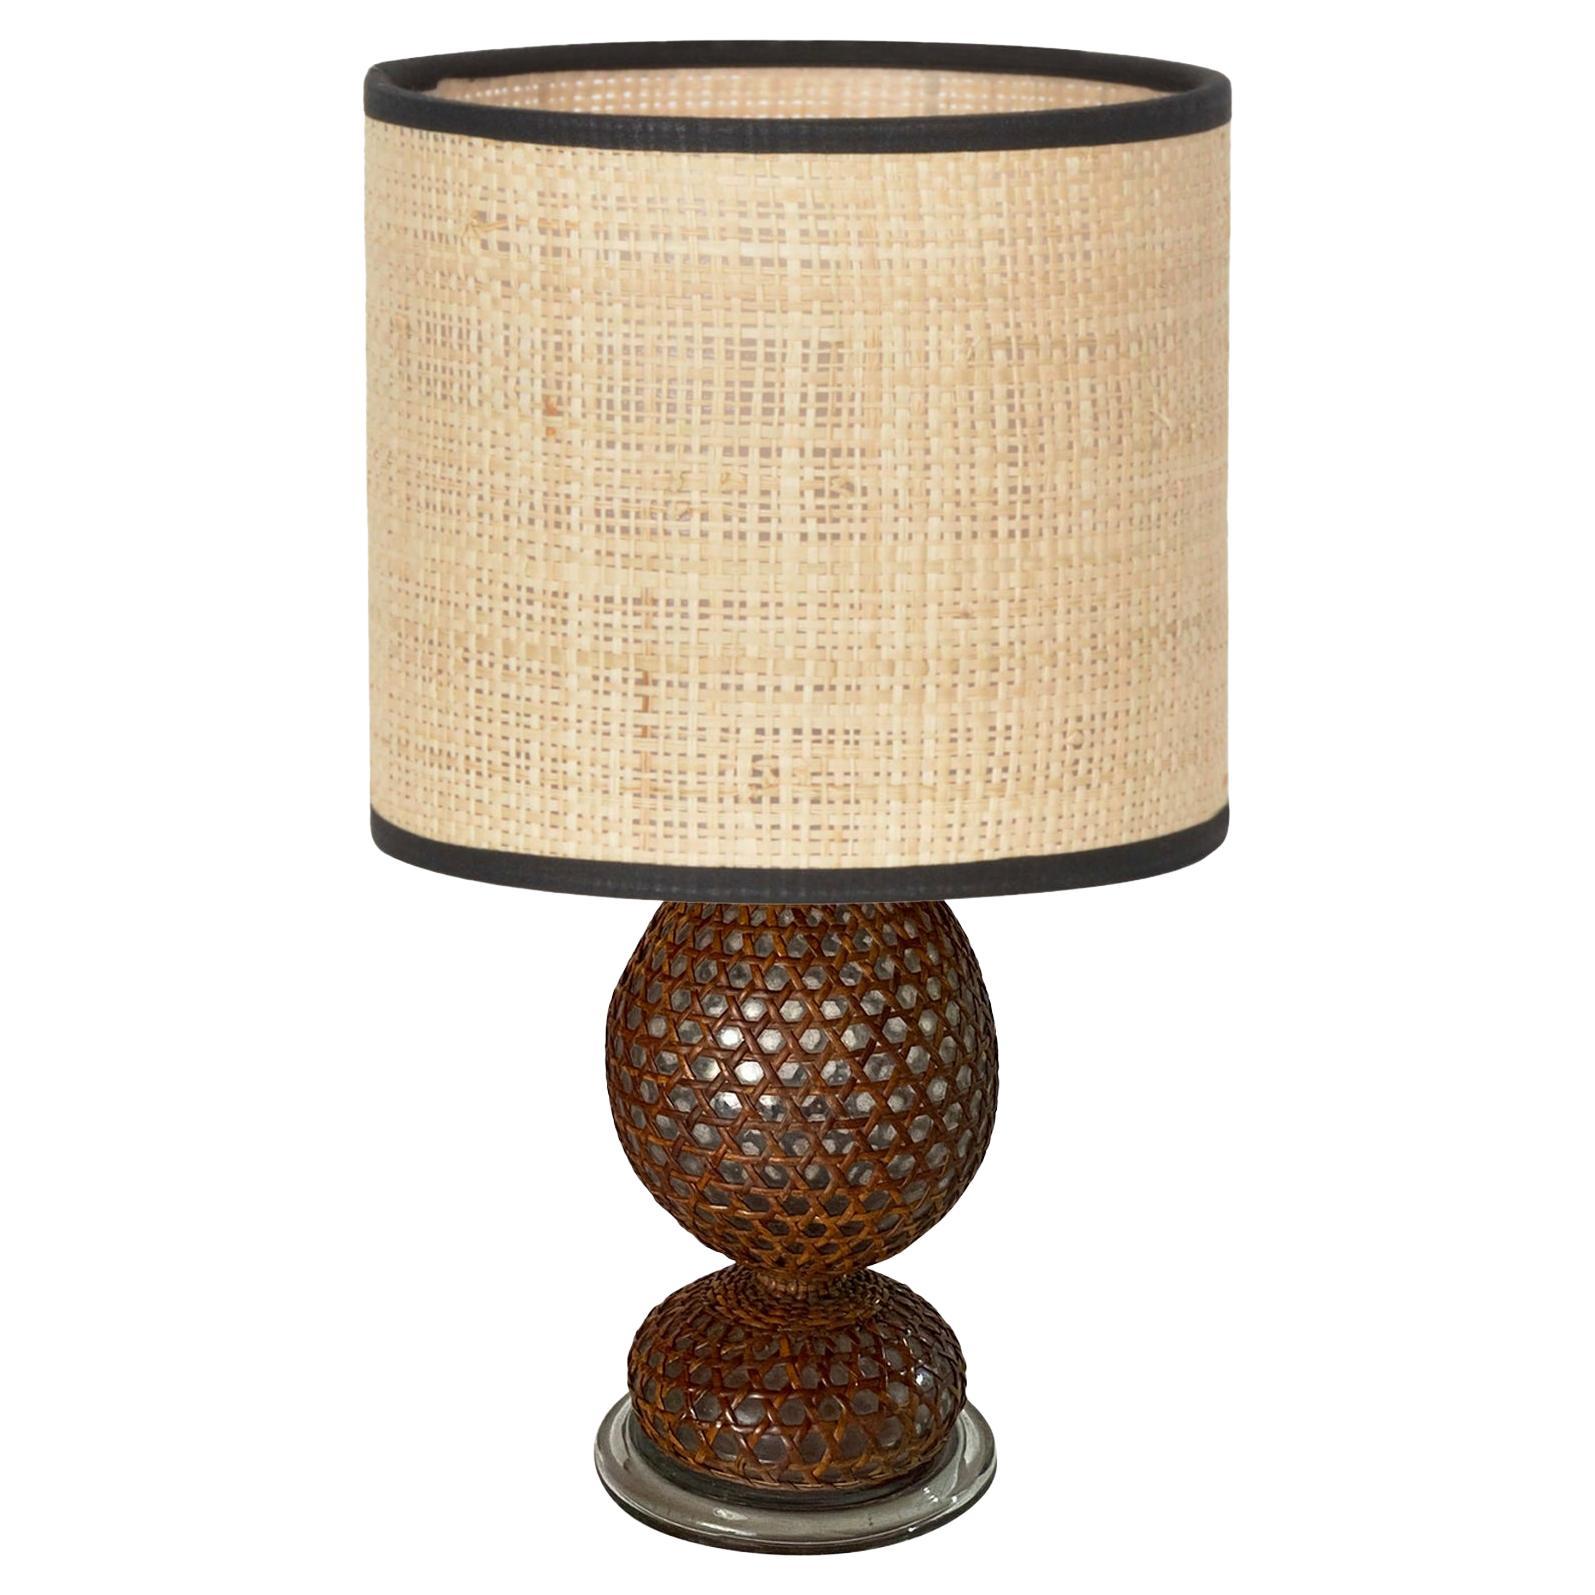 Late 20th Century Glass and Rattan Table Lamp, Made in England, Brown Color, Circa 1970 For Sale